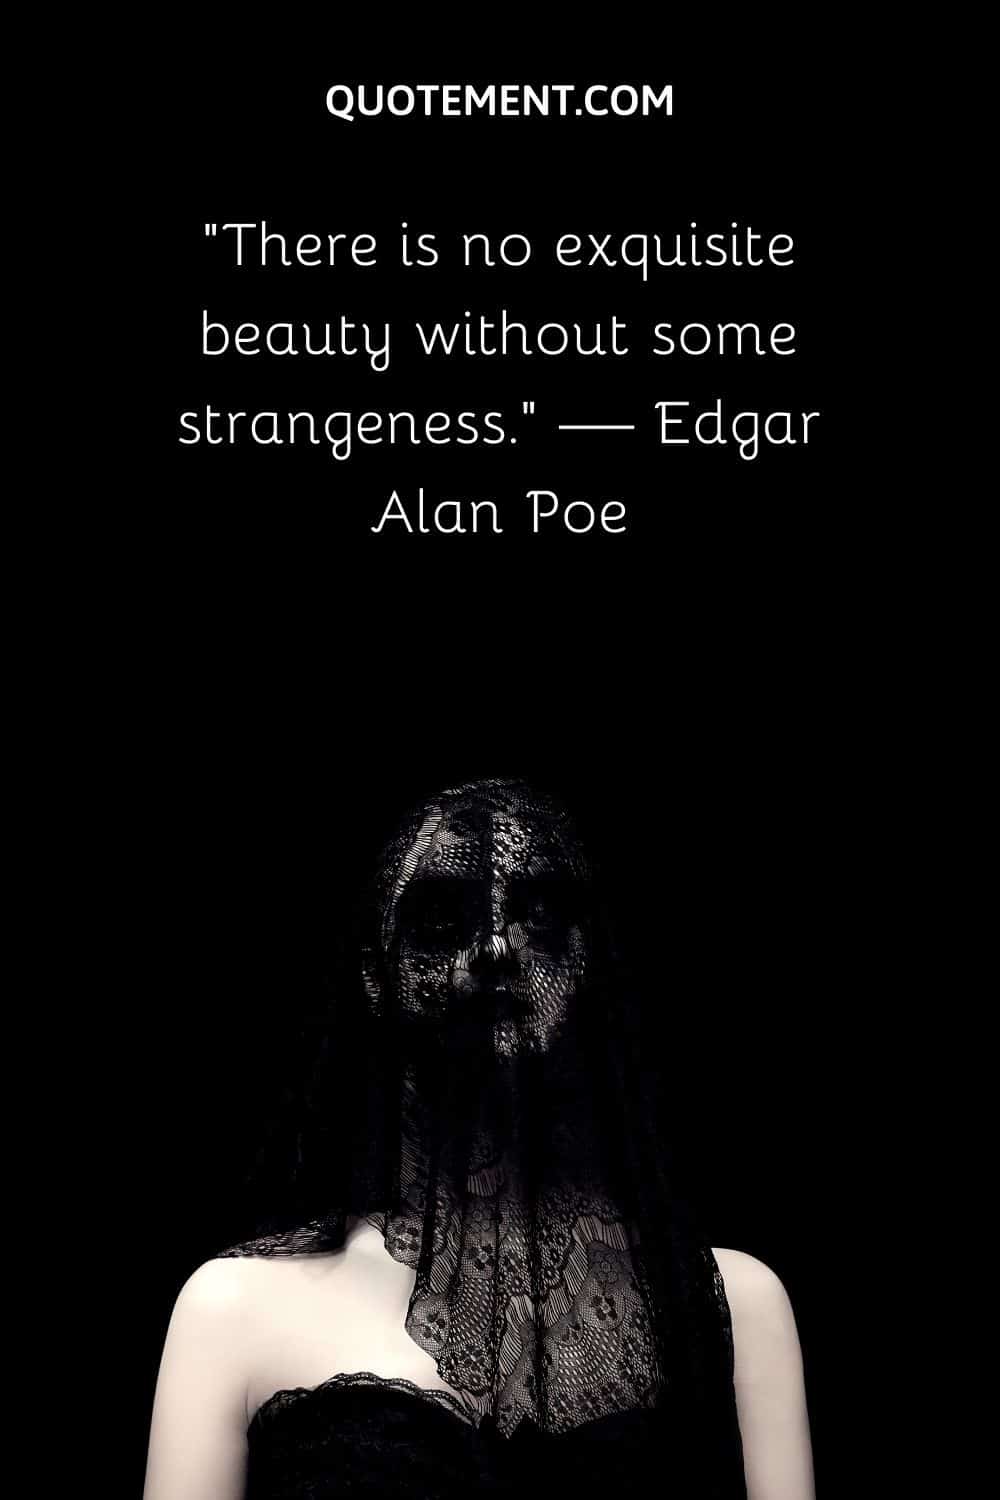 There is no exquisite beauty without some strangeness